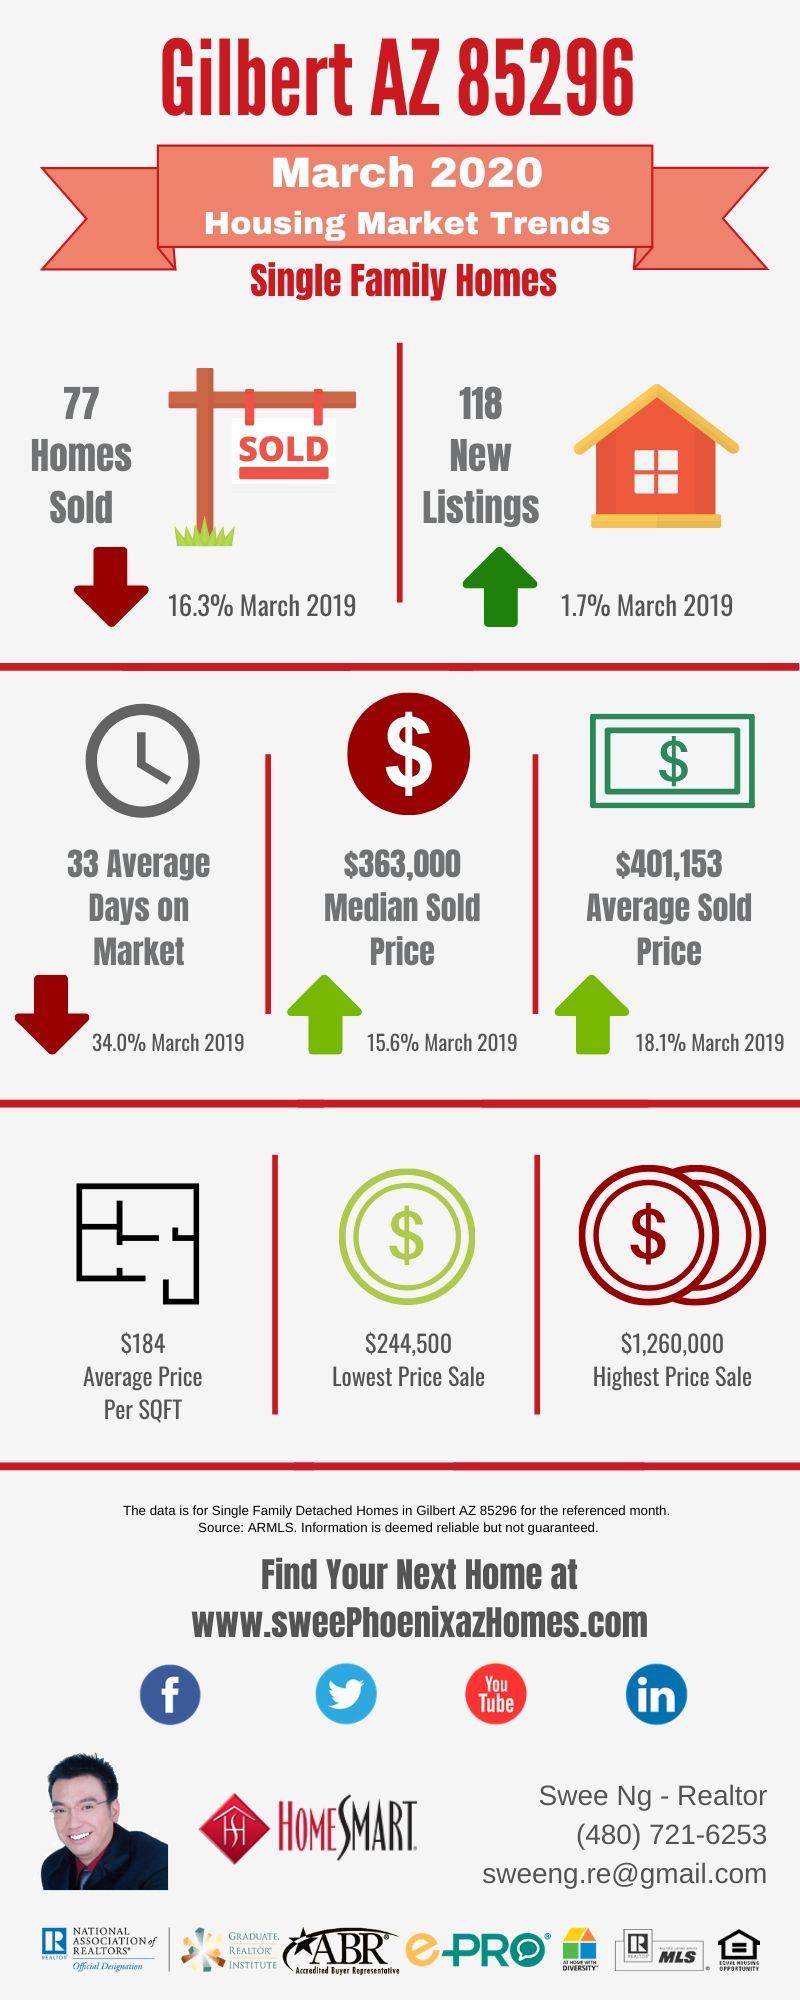 Gilbert AZ 85296 Housing Market Trends Report March 2020 by Swee Ng, Real Estate and House Value